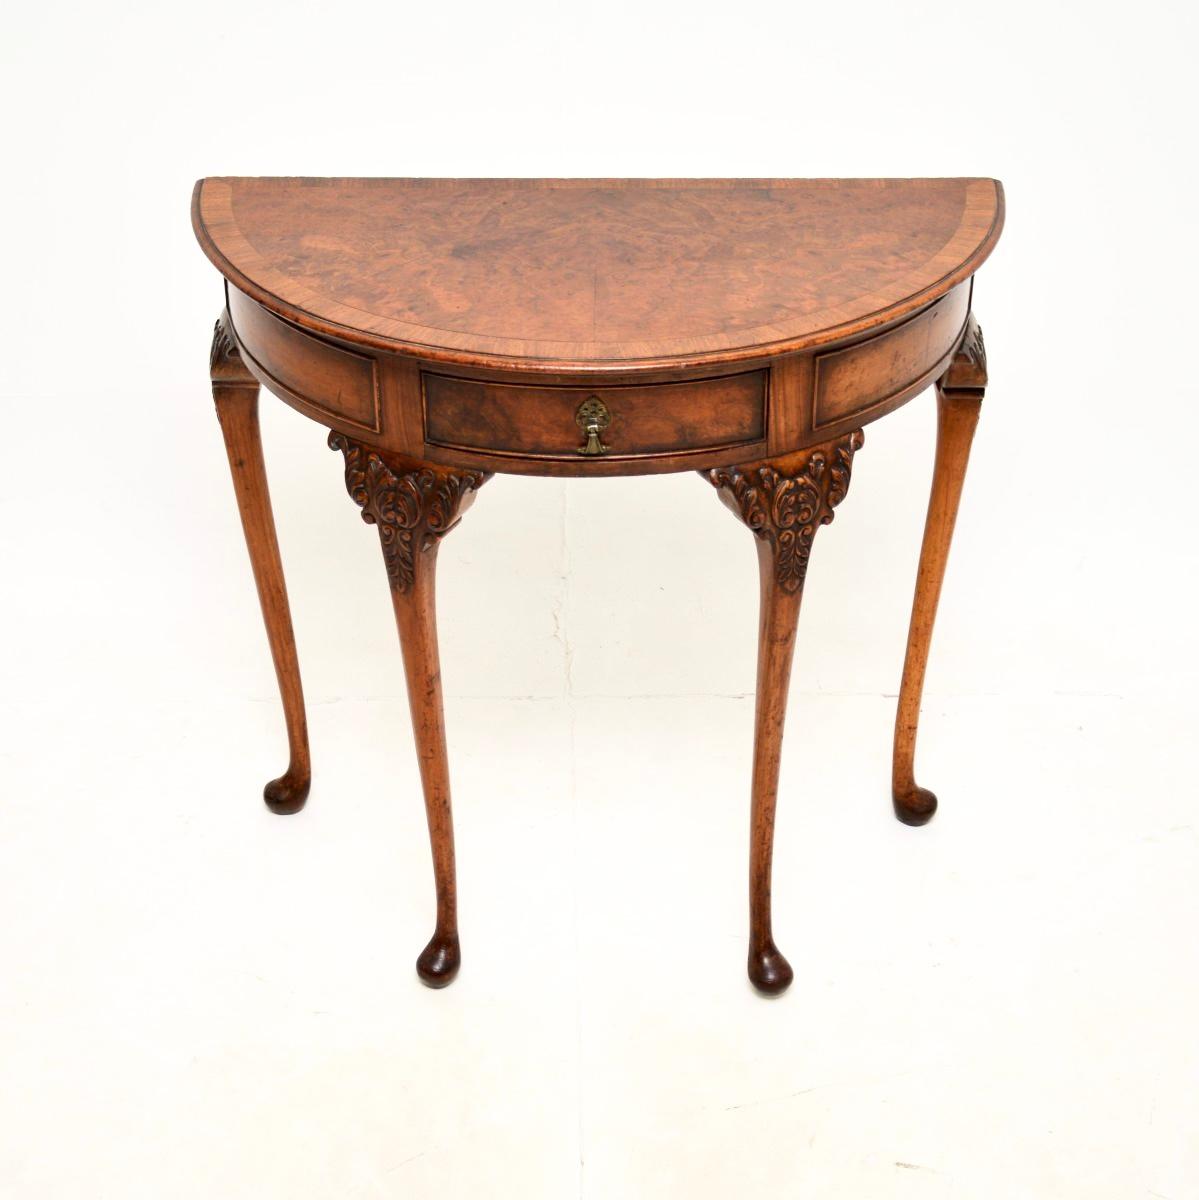 A wonderful antique burr walnut console side table. This was made in England, we would date it from around the 1890-1900 period though it could possibly be a bit earlier.

The quality is outstanding, this is extremely well made with a lovely and